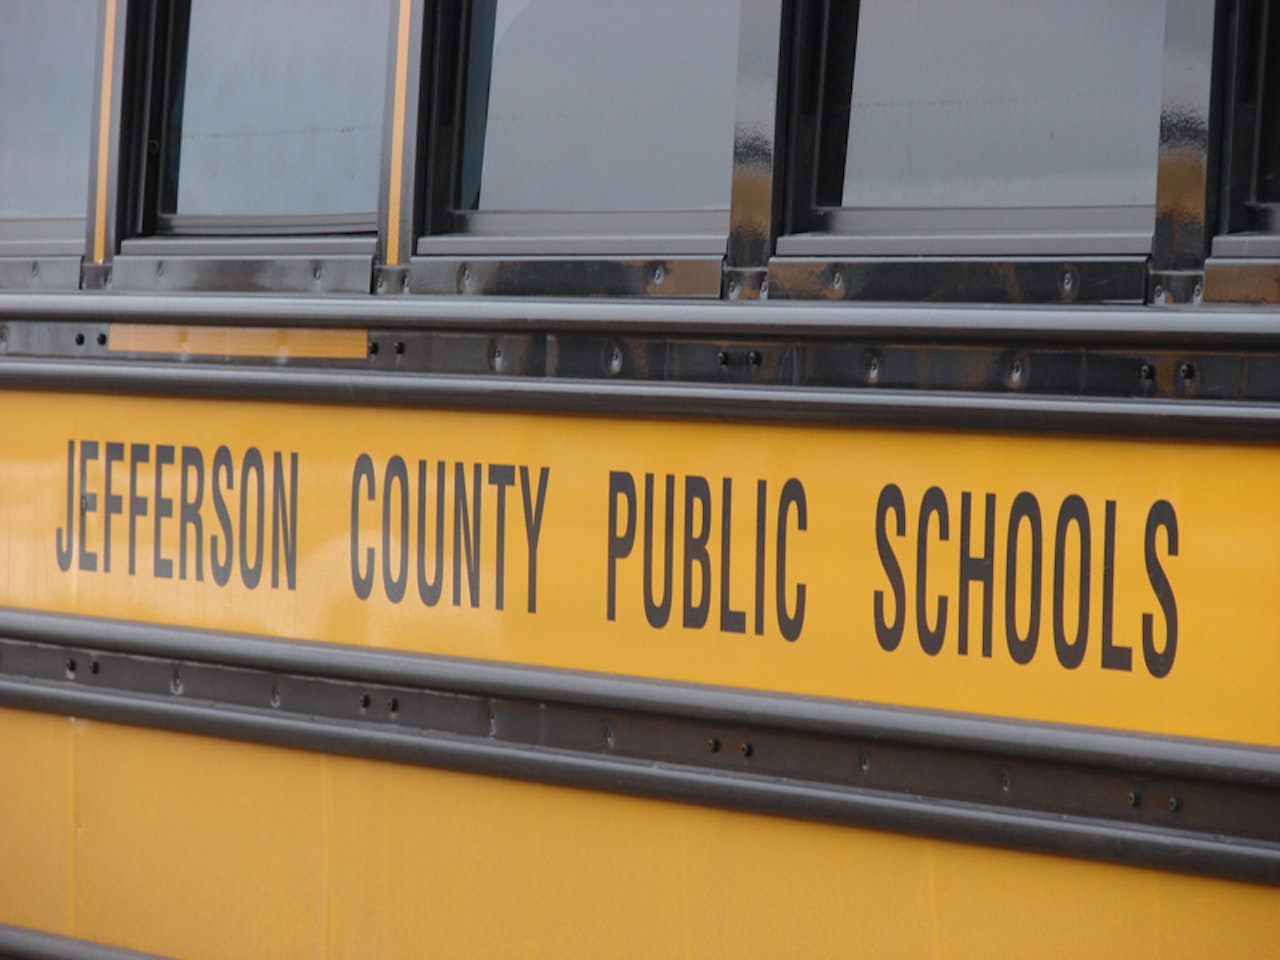 Jefferson County Public Schools: From Legal Enforcement to Ongoing